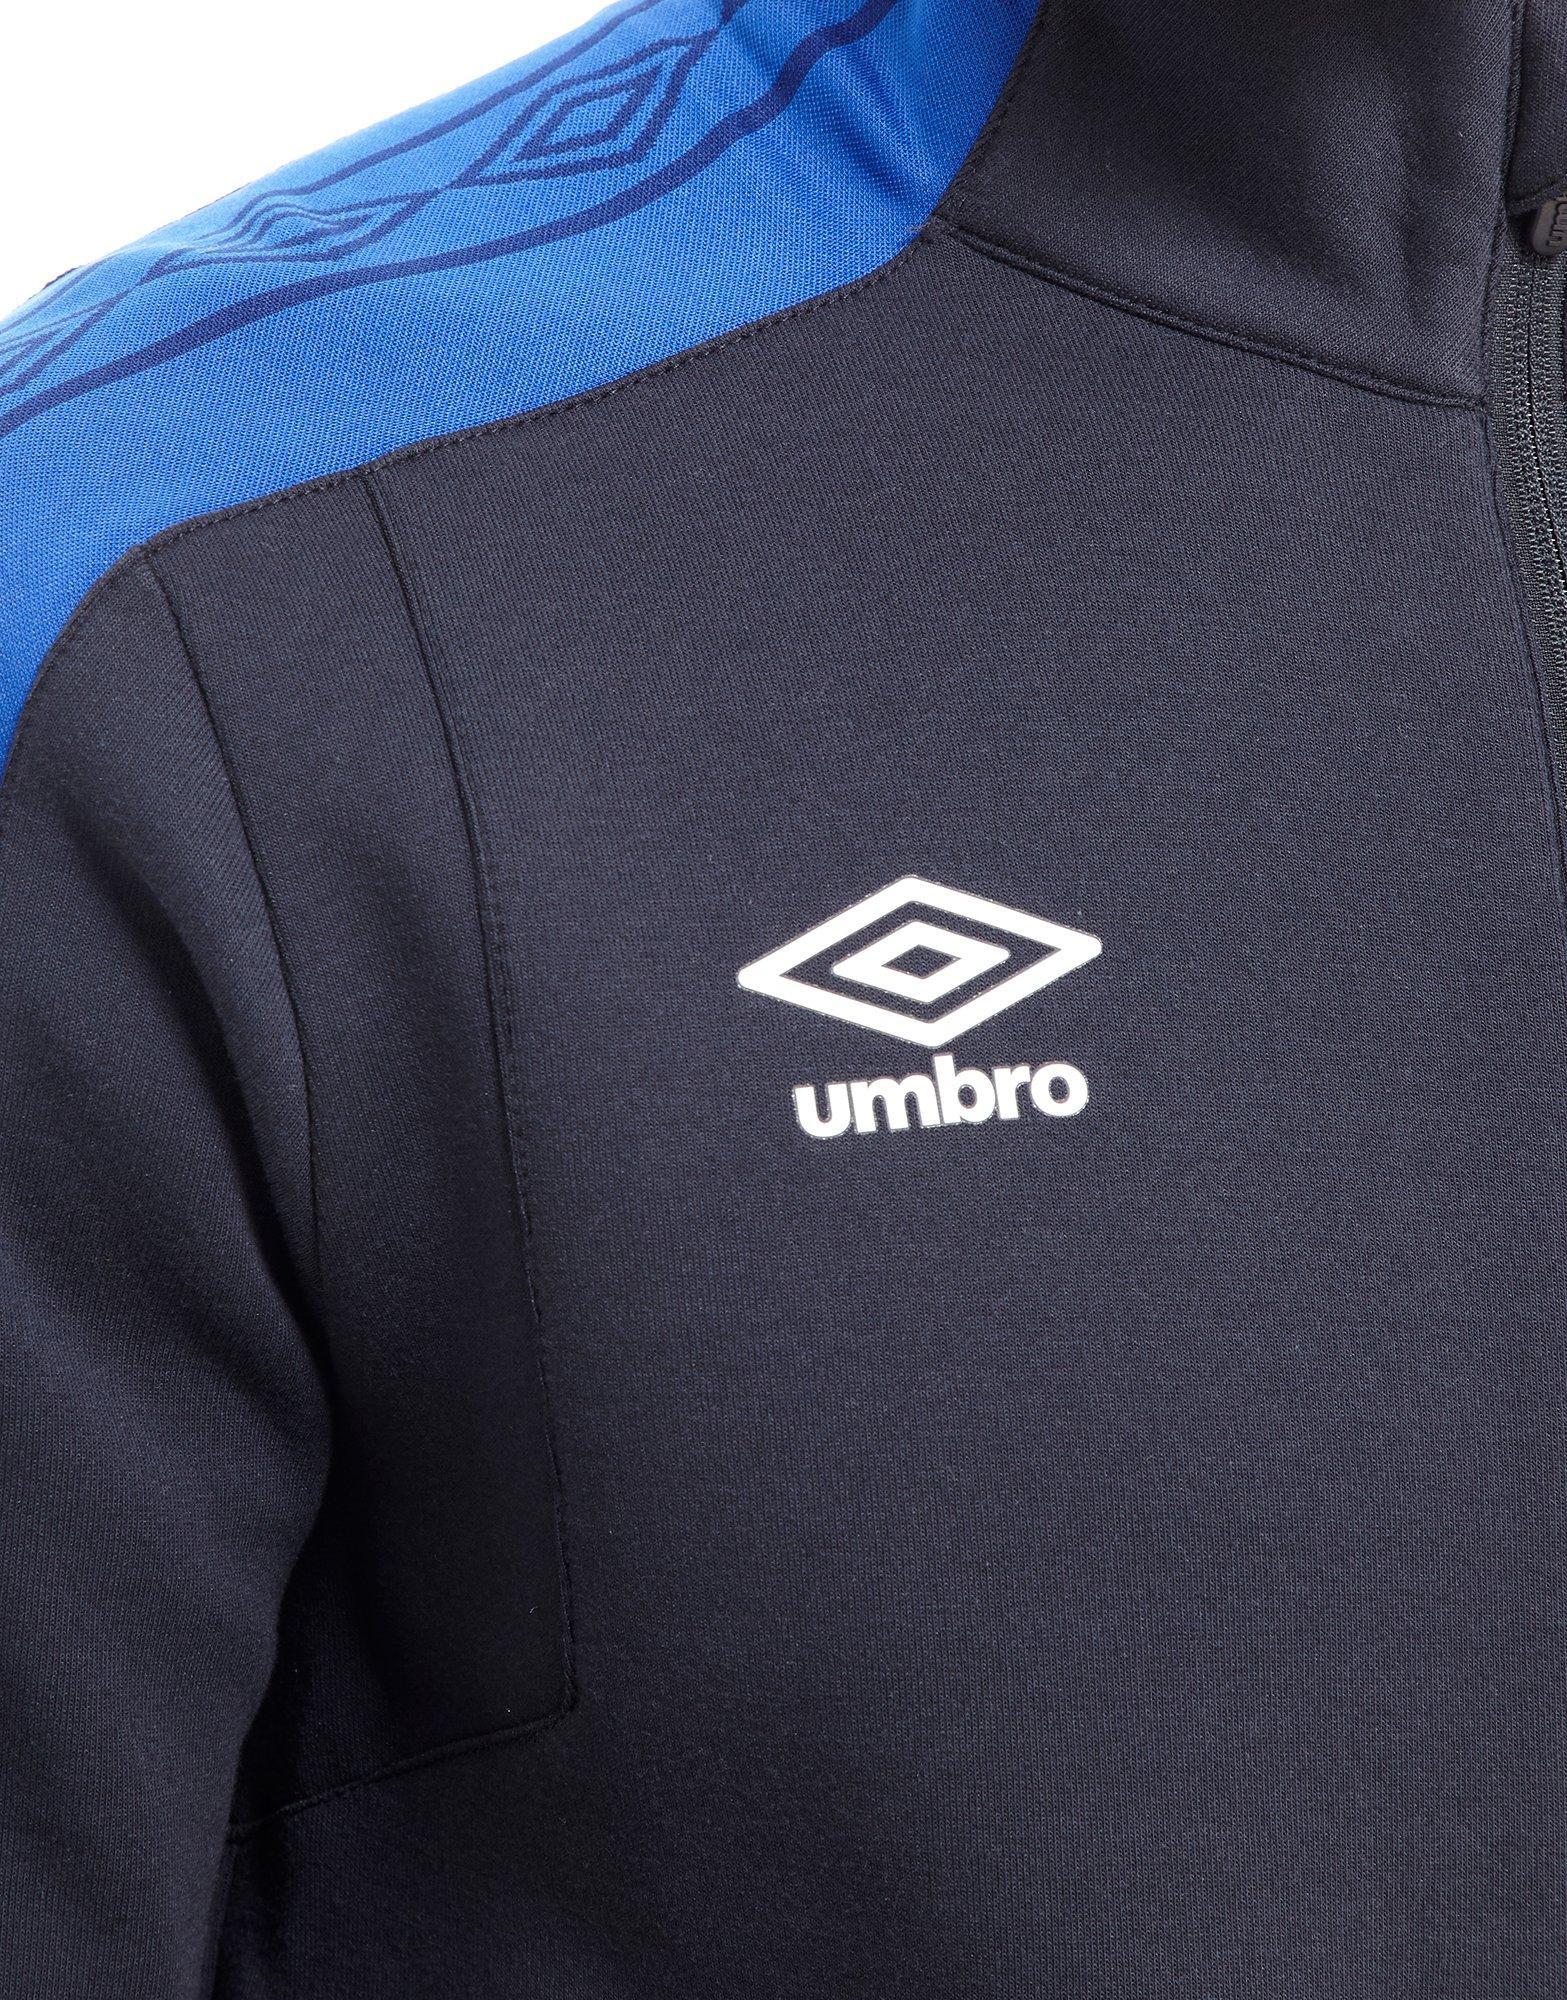 Umbro Cotton Everton Fc Track Top in Navy (Blue) for Men - Lyst